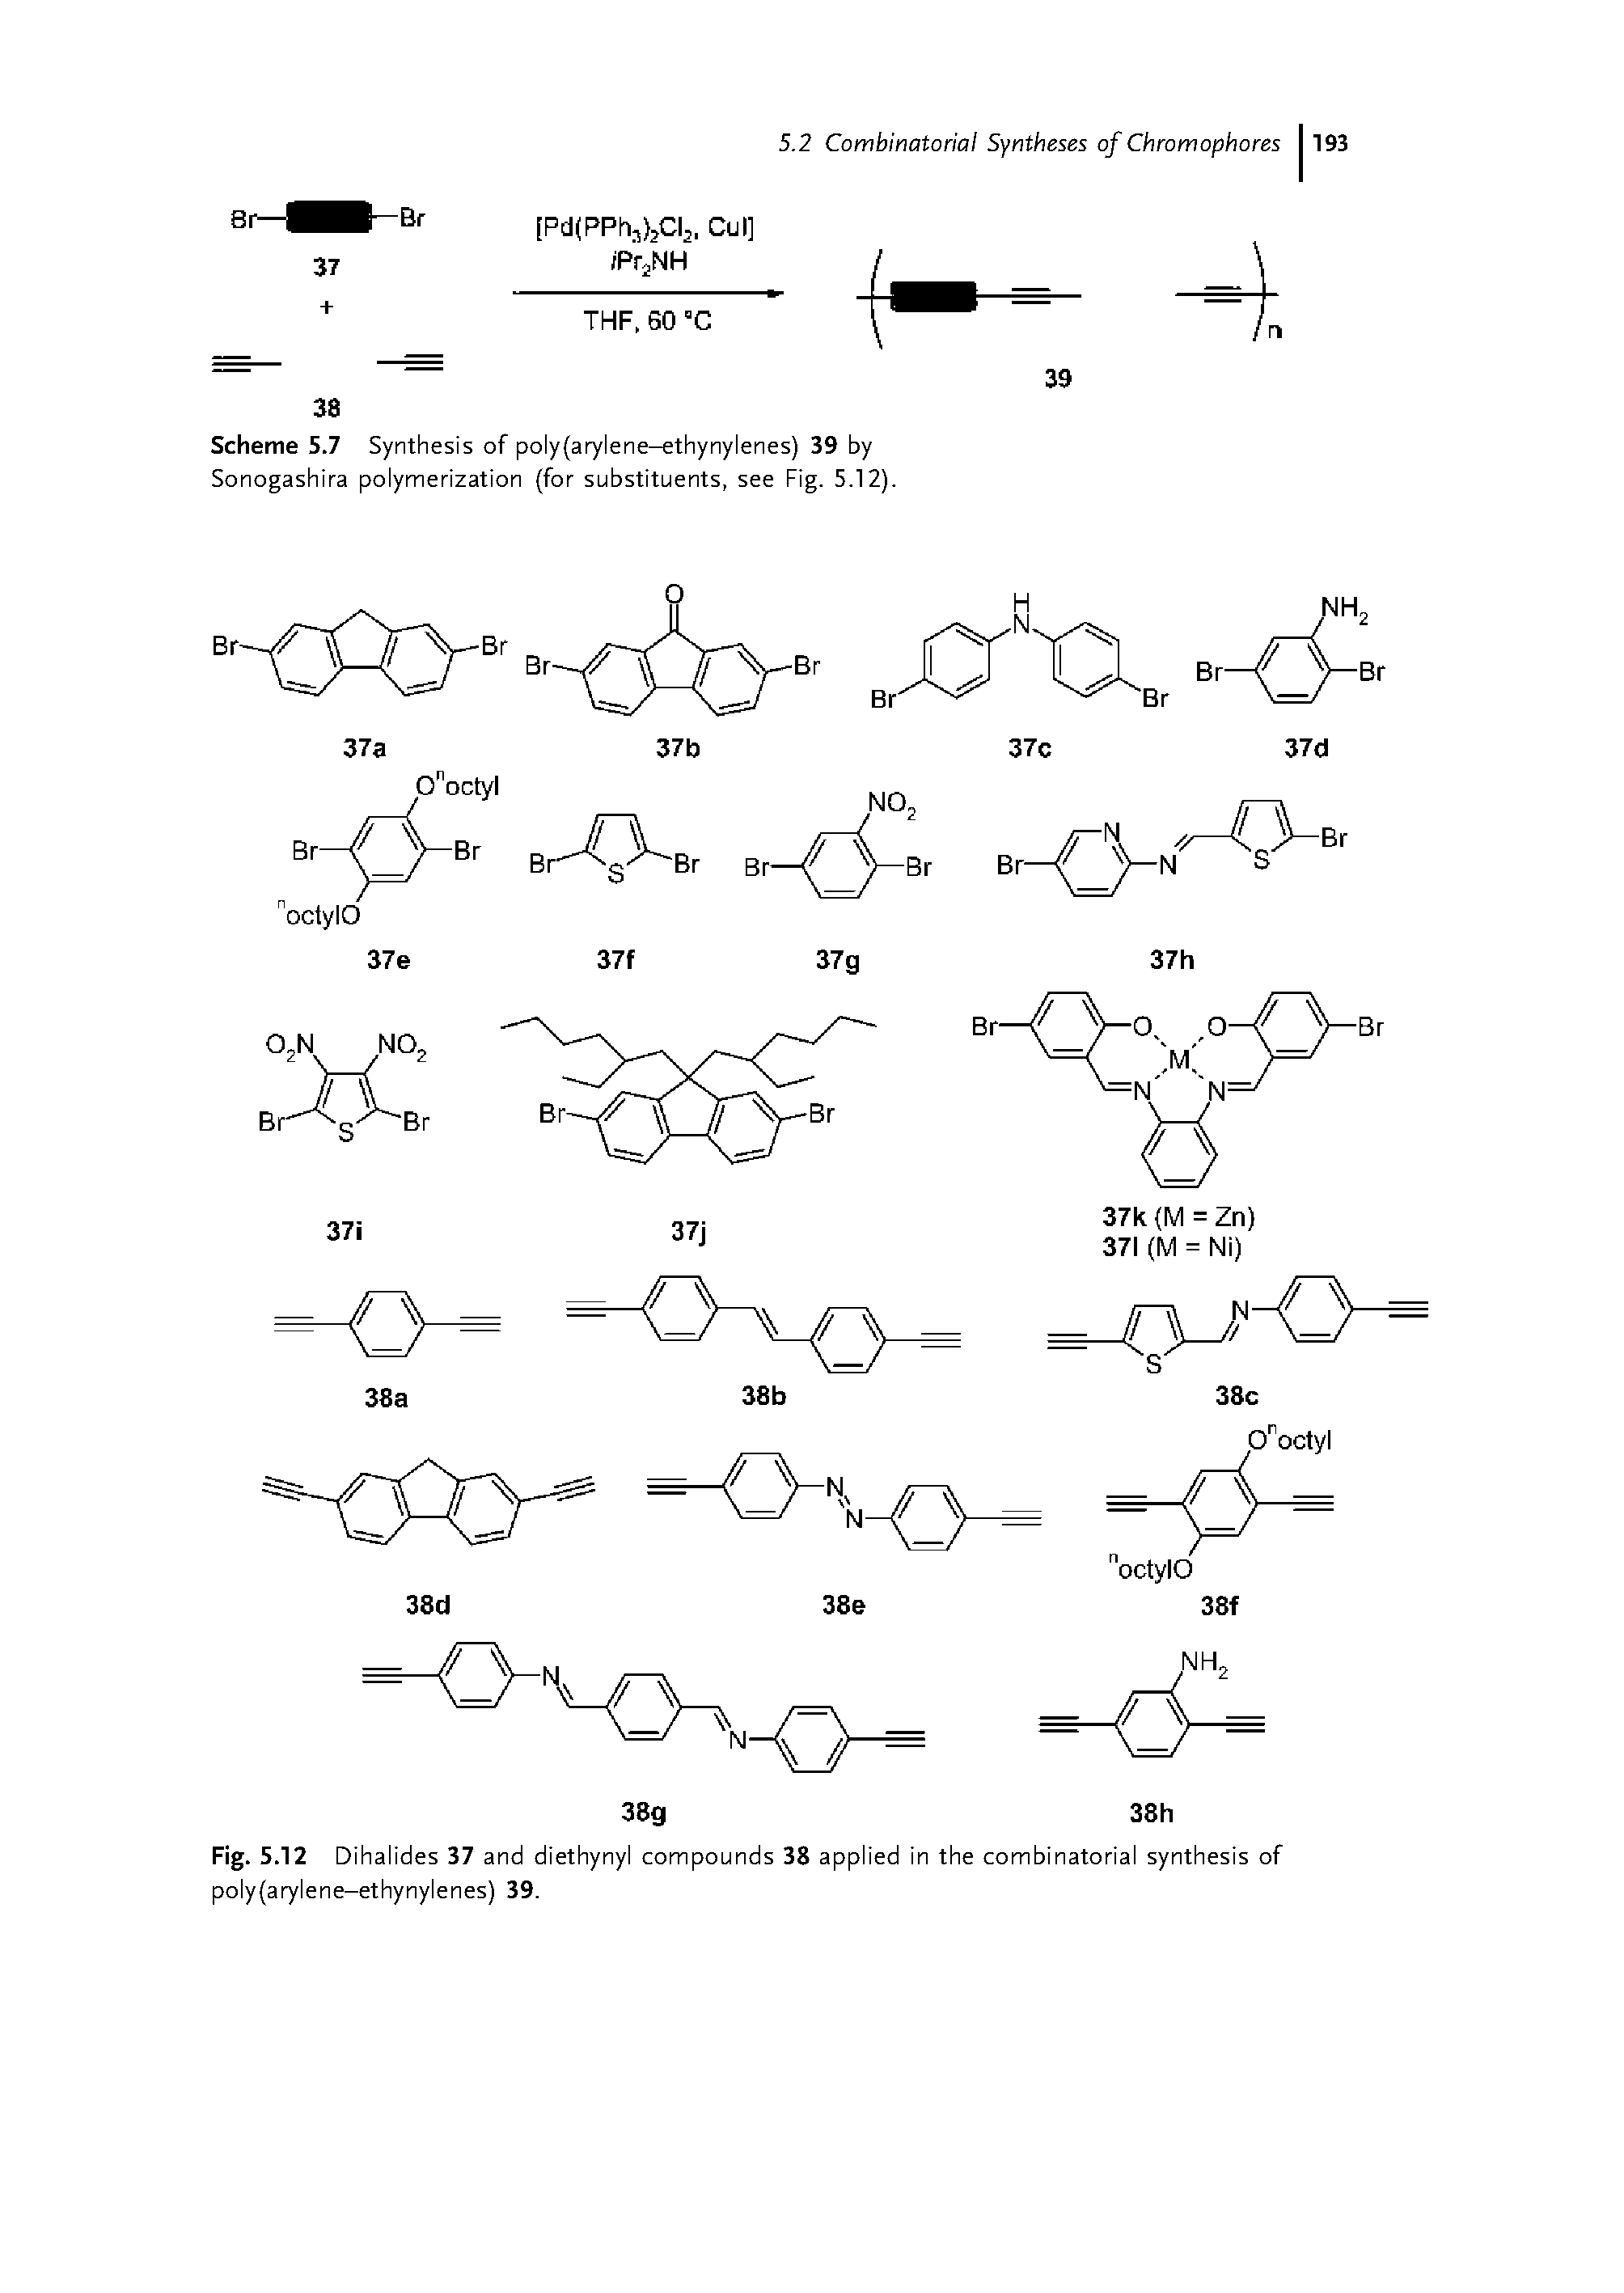 Scheme 5.7 Synthesis of poly(arylene-ethynylenes) 39 by Sonogashira polymerization (for substituents, see Fig. 5.12).